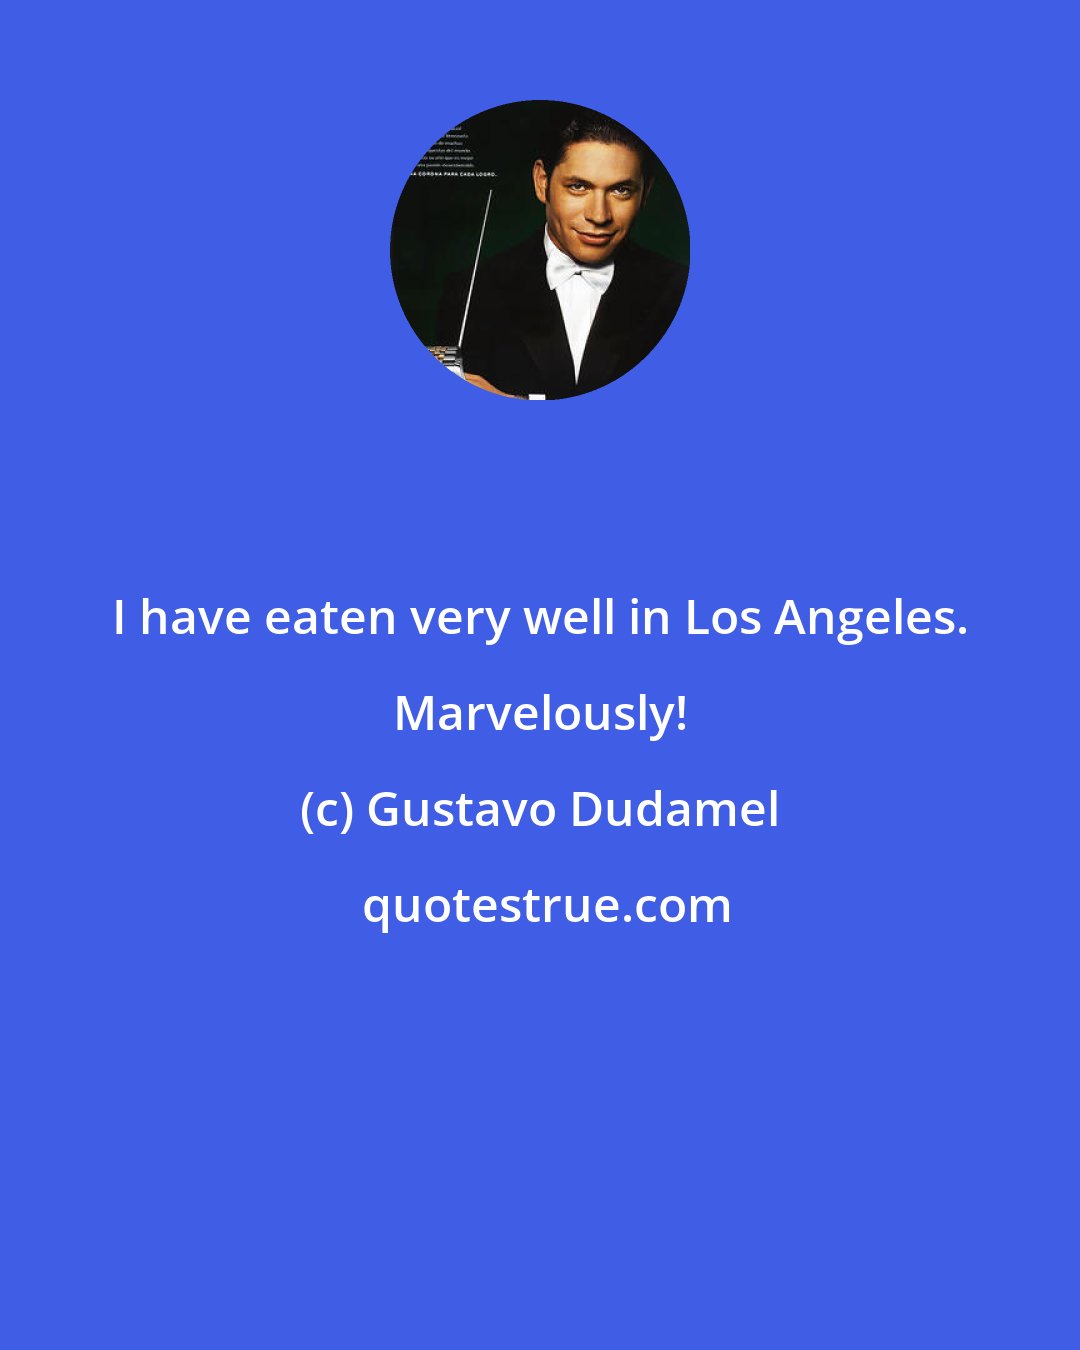 Gustavo Dudamel: I have eaten very well in Los Angeles. Marvelously!